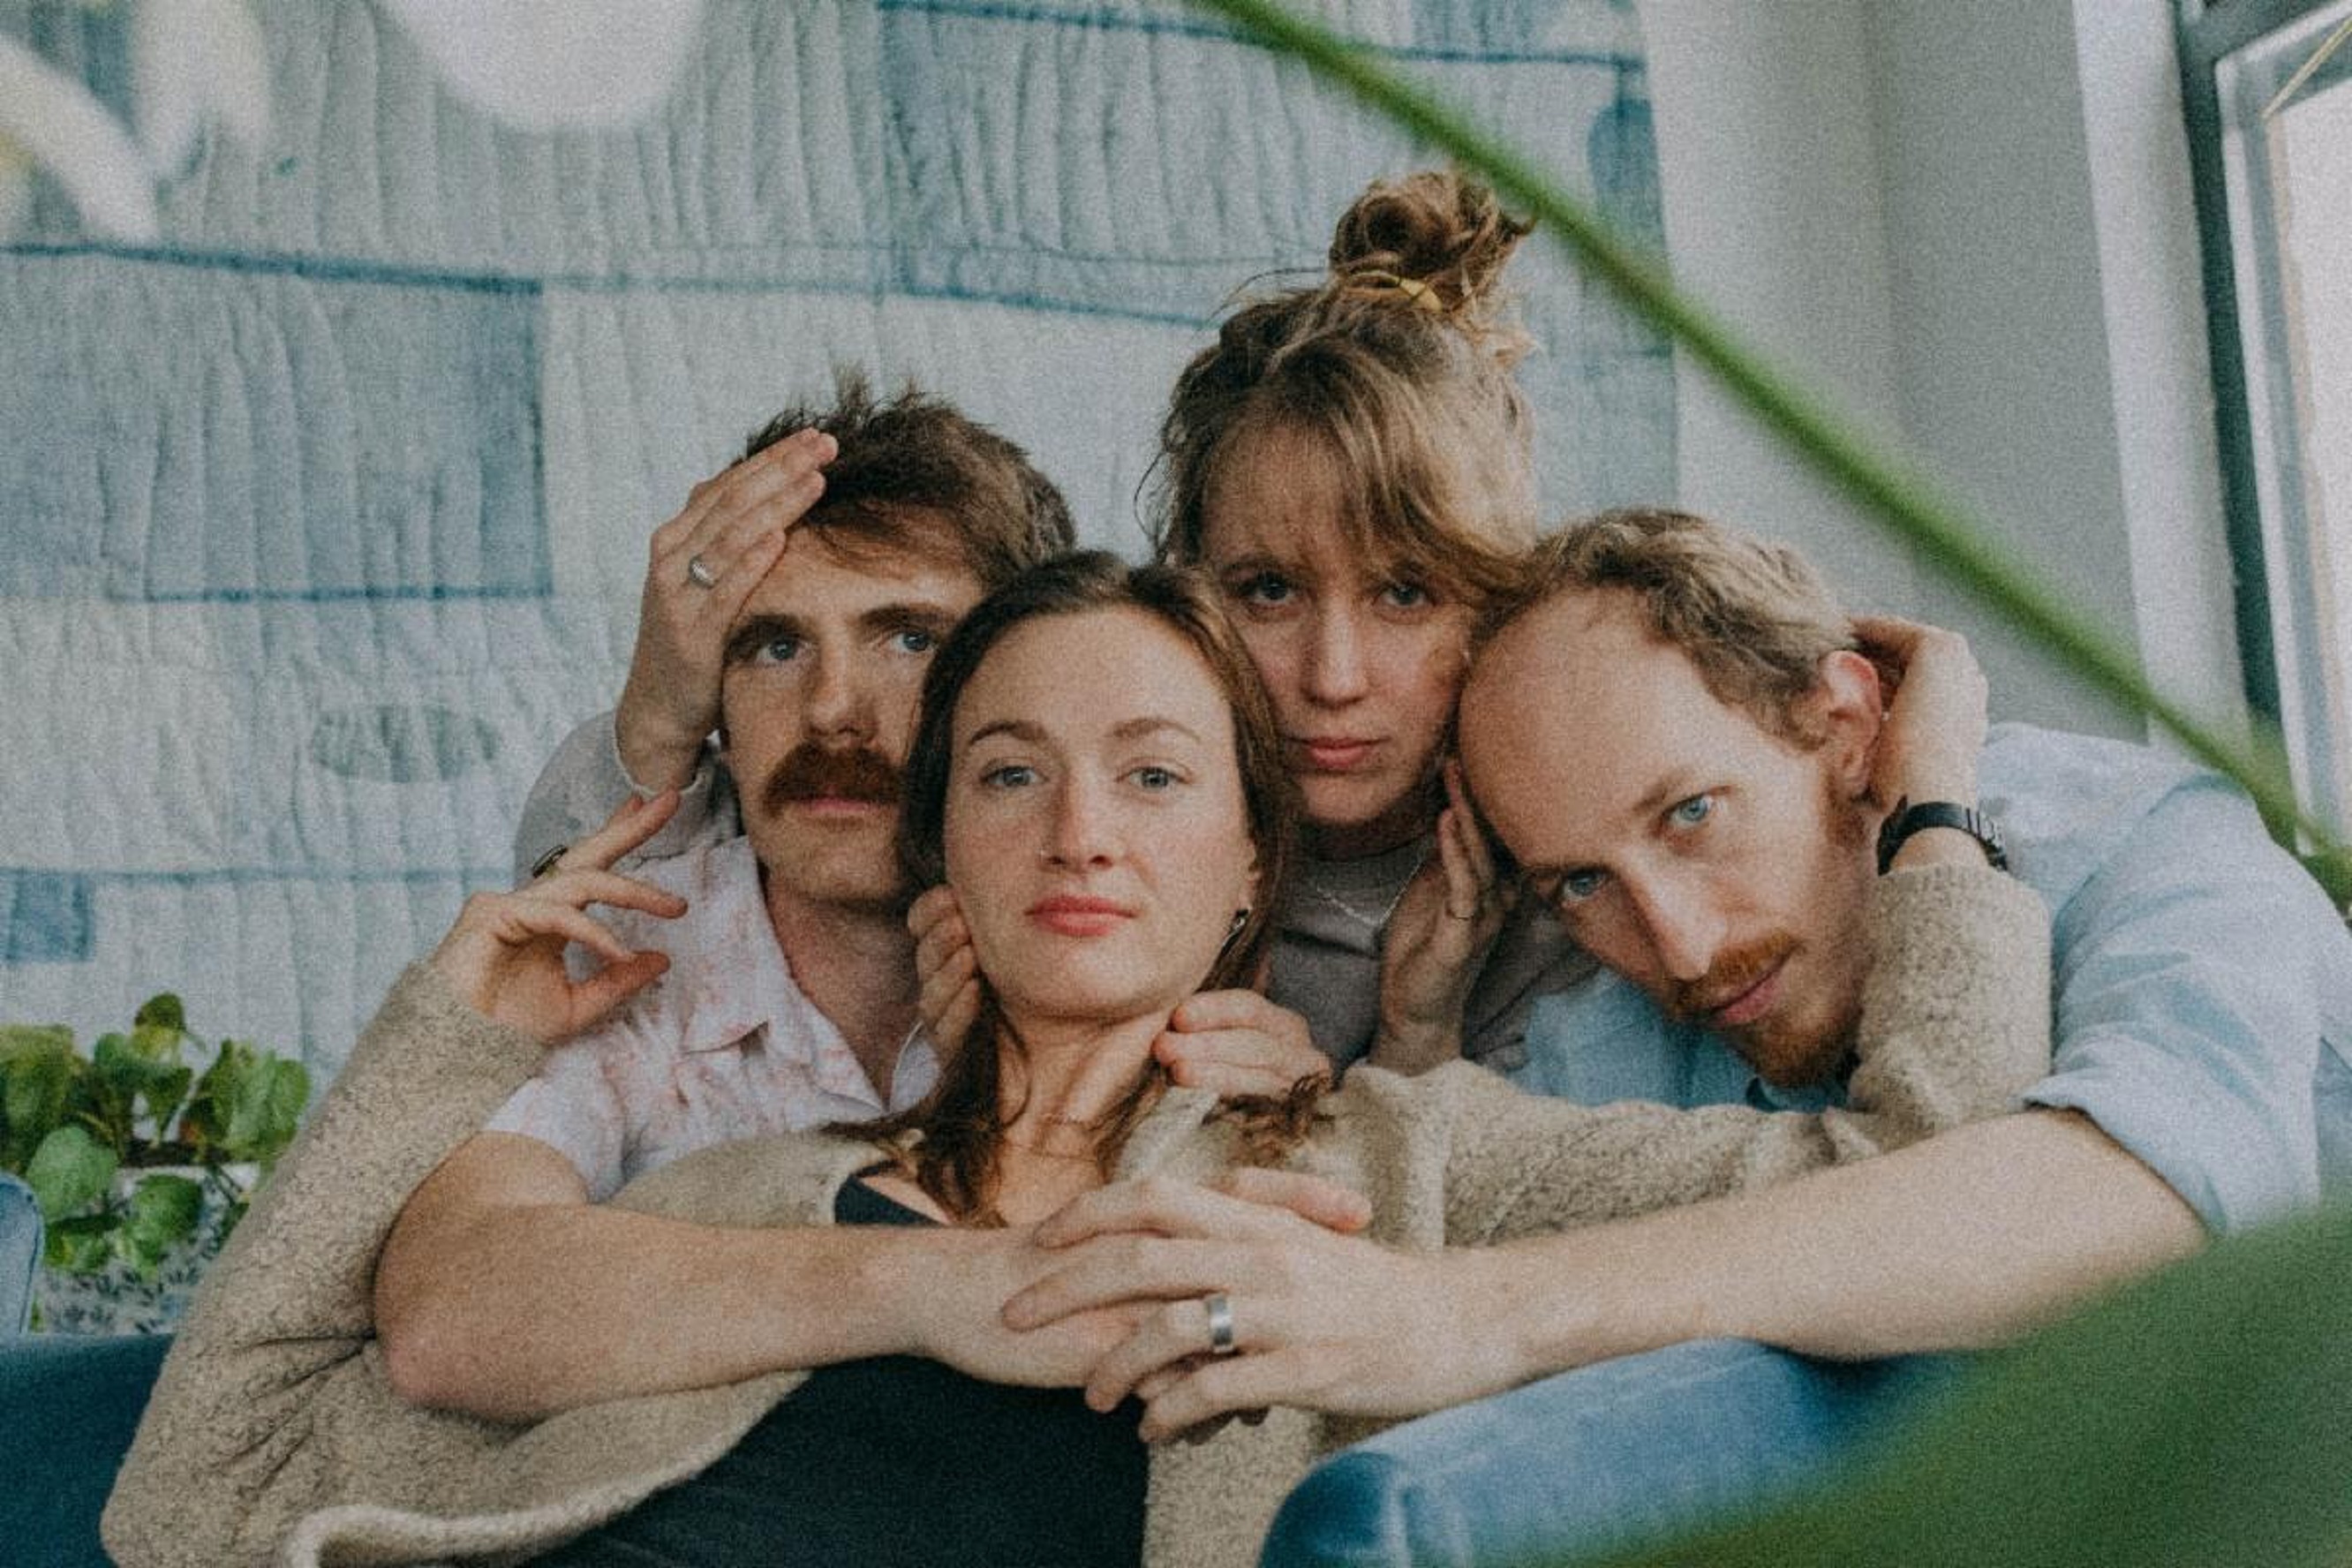 UPSTATE Shares New Single “CATALPA” From Forthcoming Album